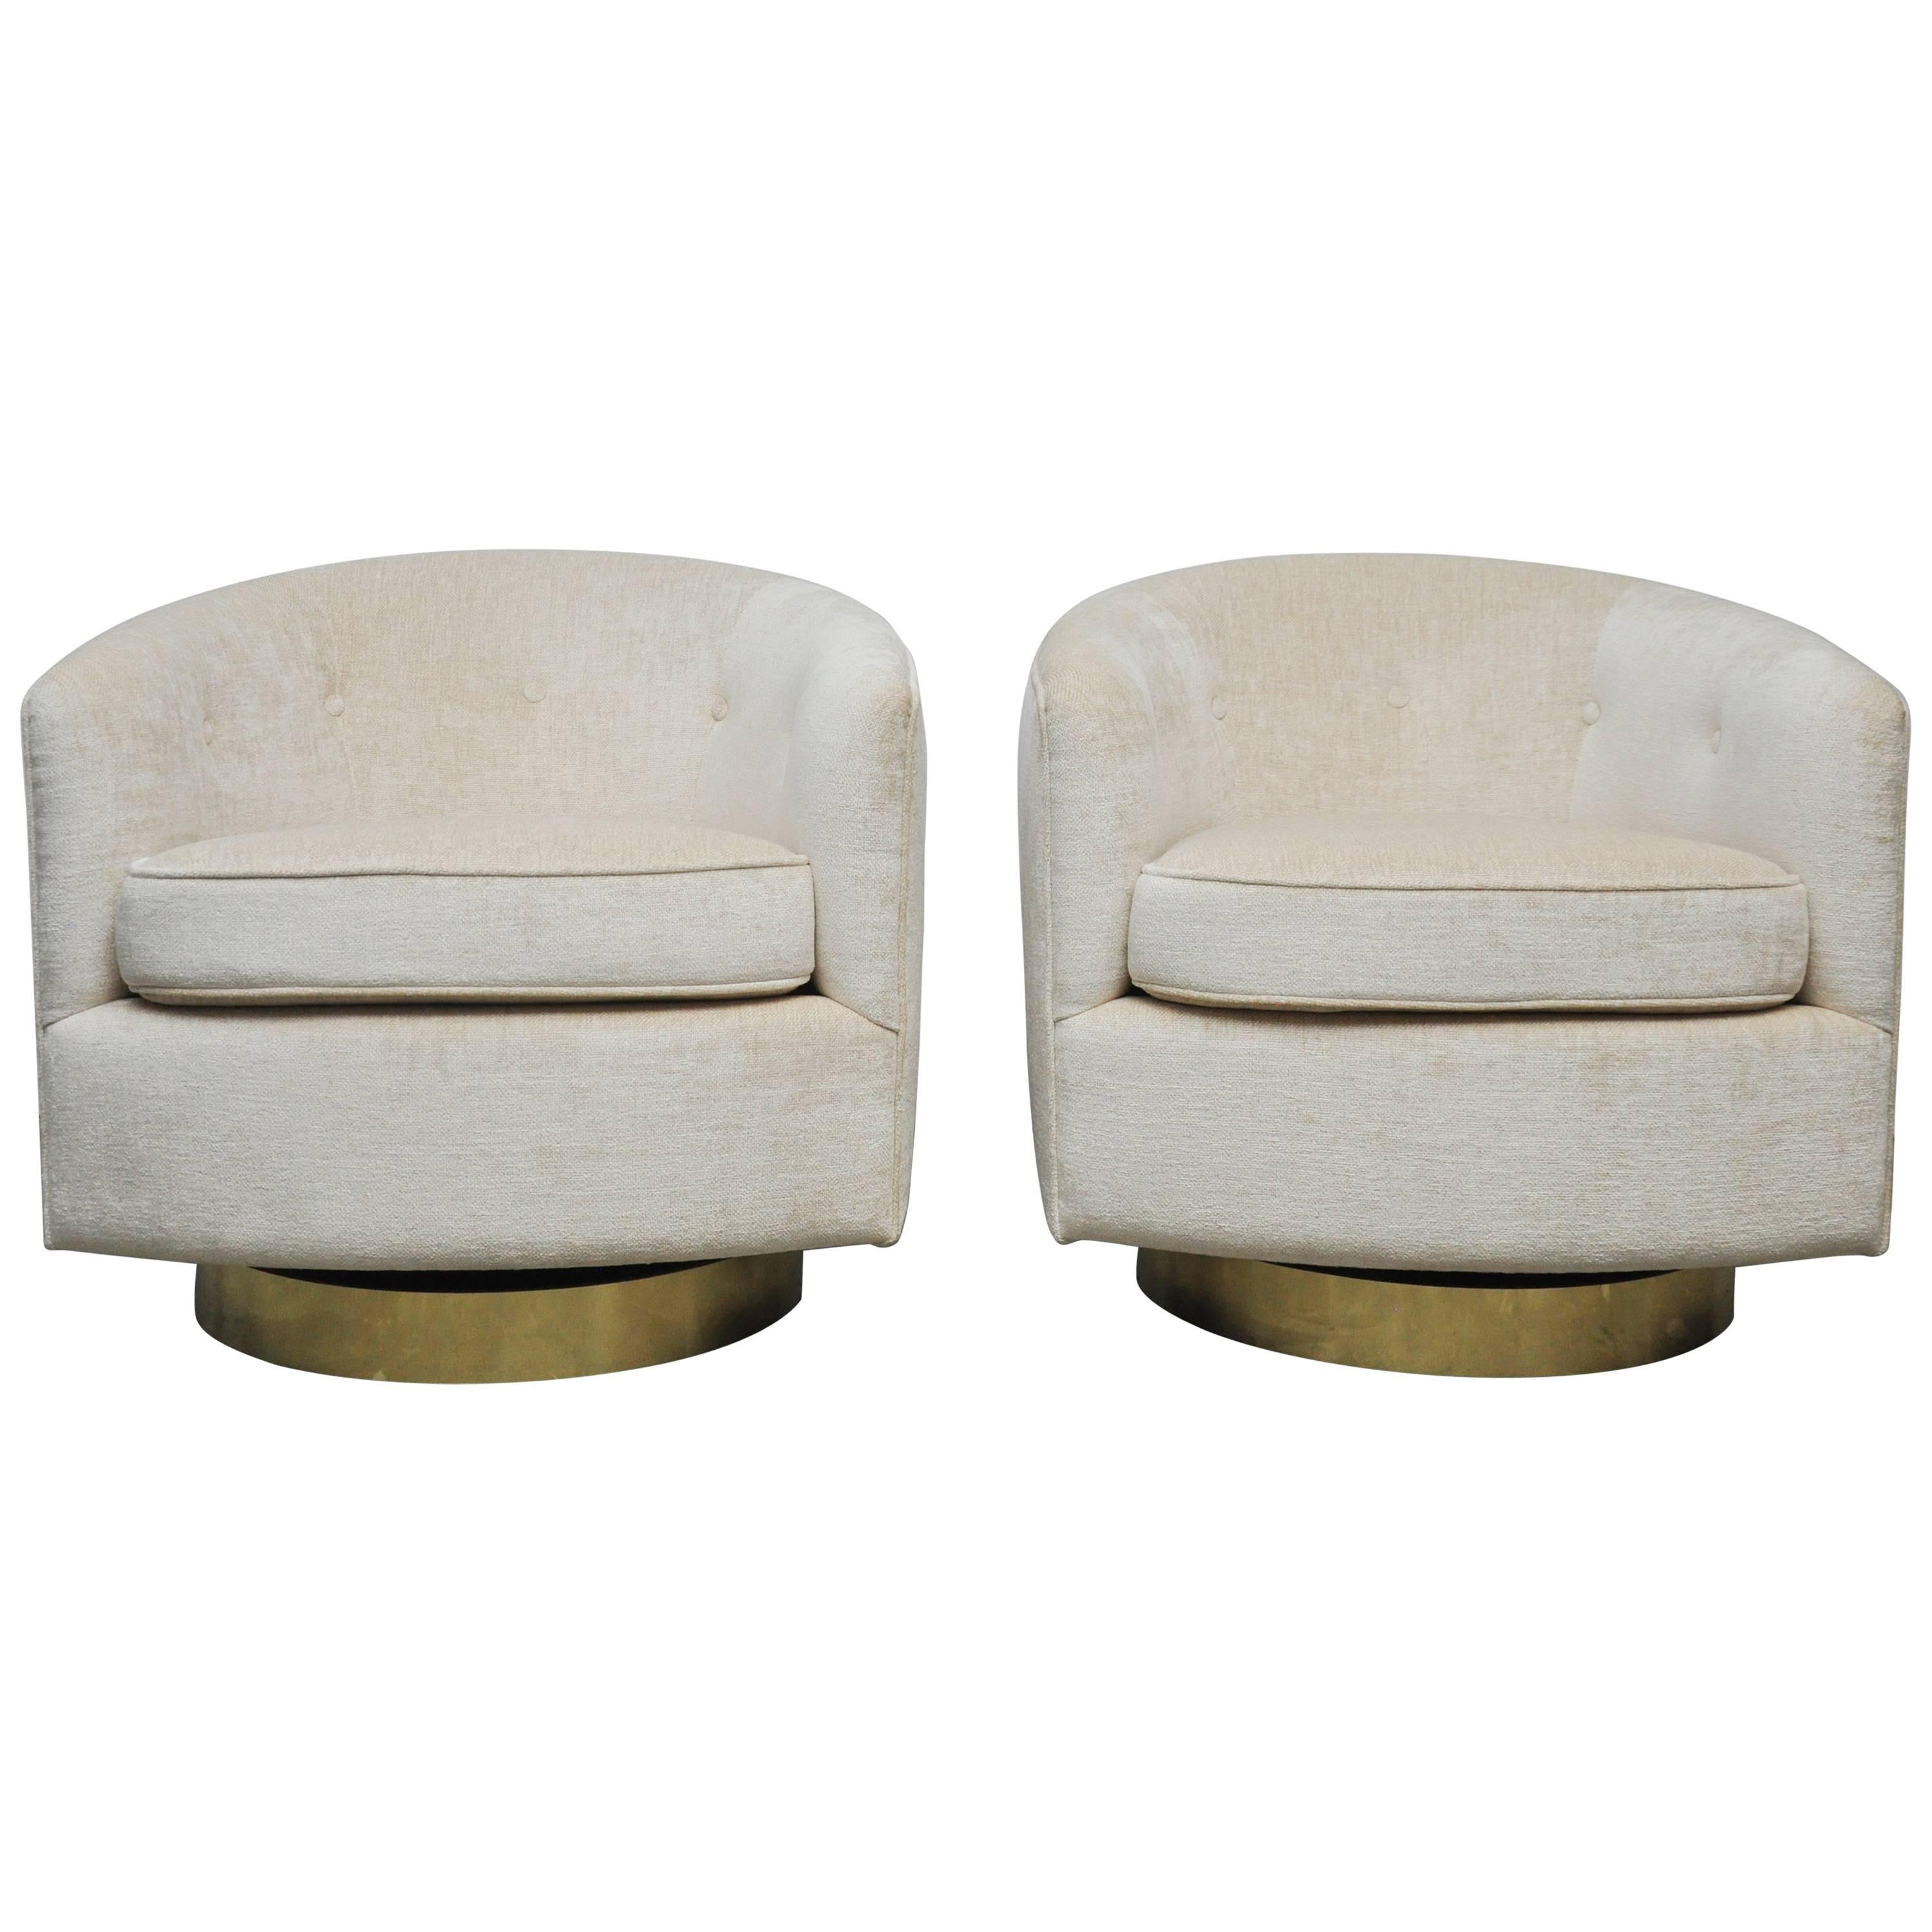 Pair of Milo Baughman Swivel Chairs on Brass Bases